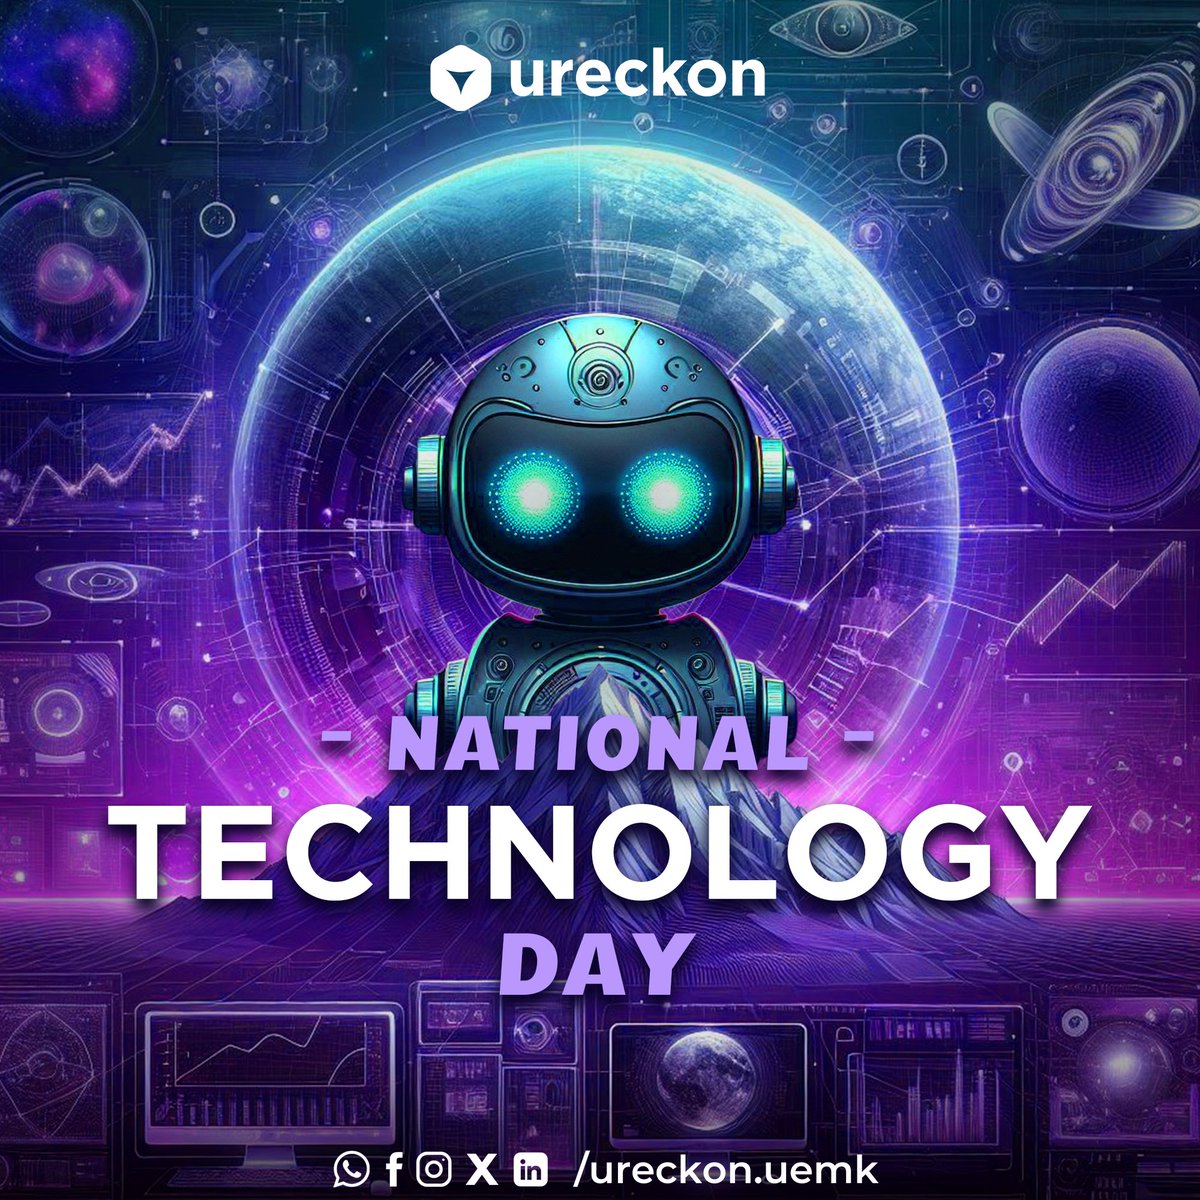 Happy National Technology Day! Today we celebrate India's strides in science and tech, marked by the 1998 nuclear tests at Pokhran. Let's honor the achievements that shape our world and inspire future innovations. Written by- Mohenish Kumar Mishra Designed by- Jaydeep Mondal